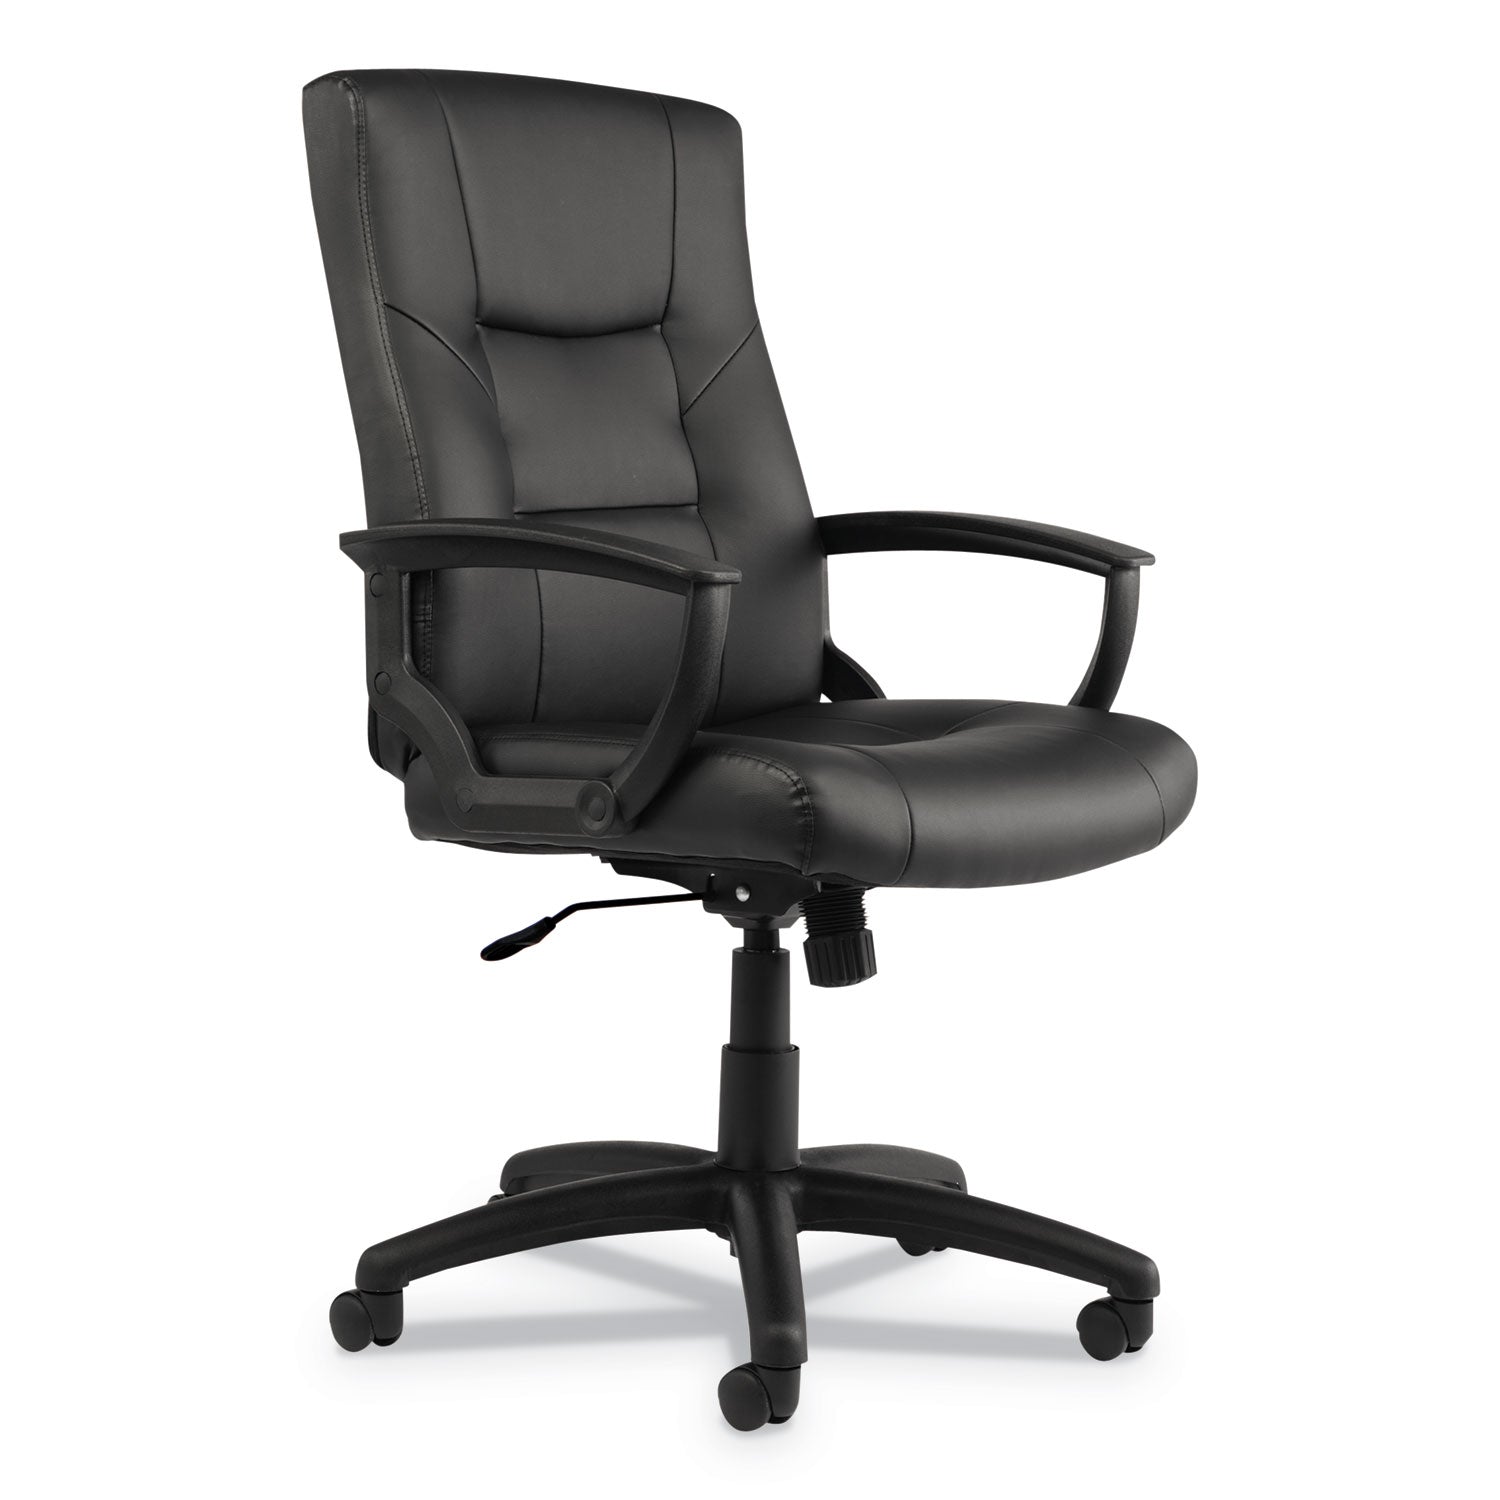 Alera YR Series Executive High-Back Swivel/Tilt Bonded Leather Chair, Supports 275 lb, 17.71" to 21.65" Seat Height, Black - 